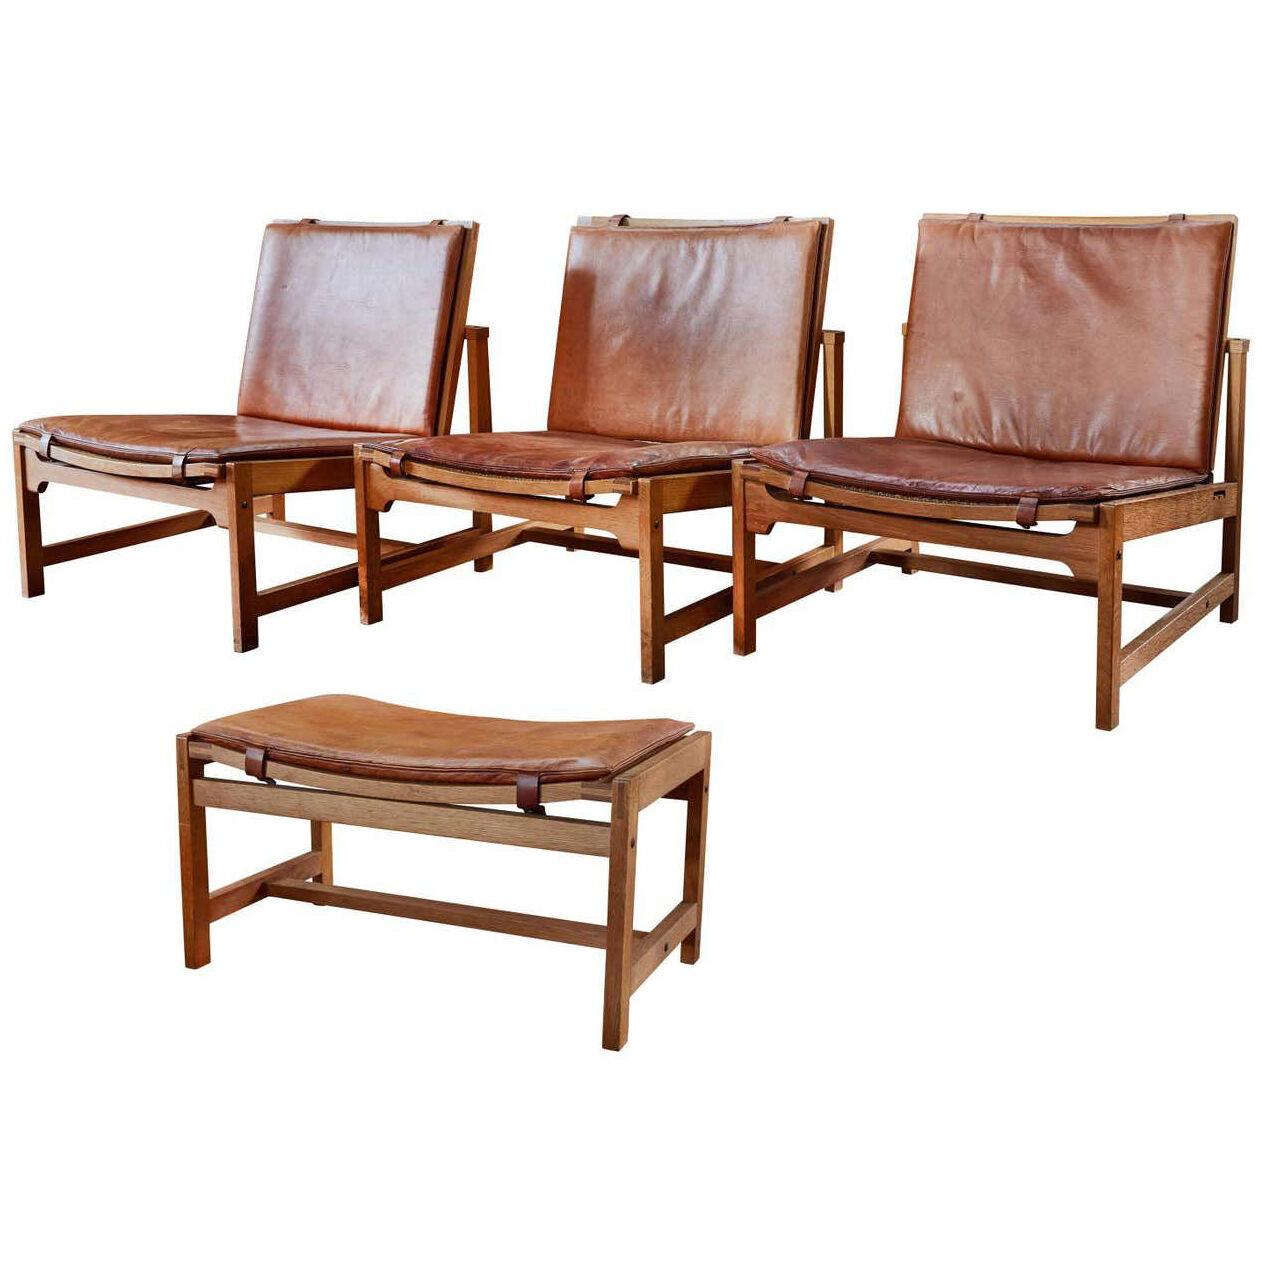 Set of 3 Arne Karlsen & Peter Hjort Leather & Wicker Lounge Chairs with Ottoman